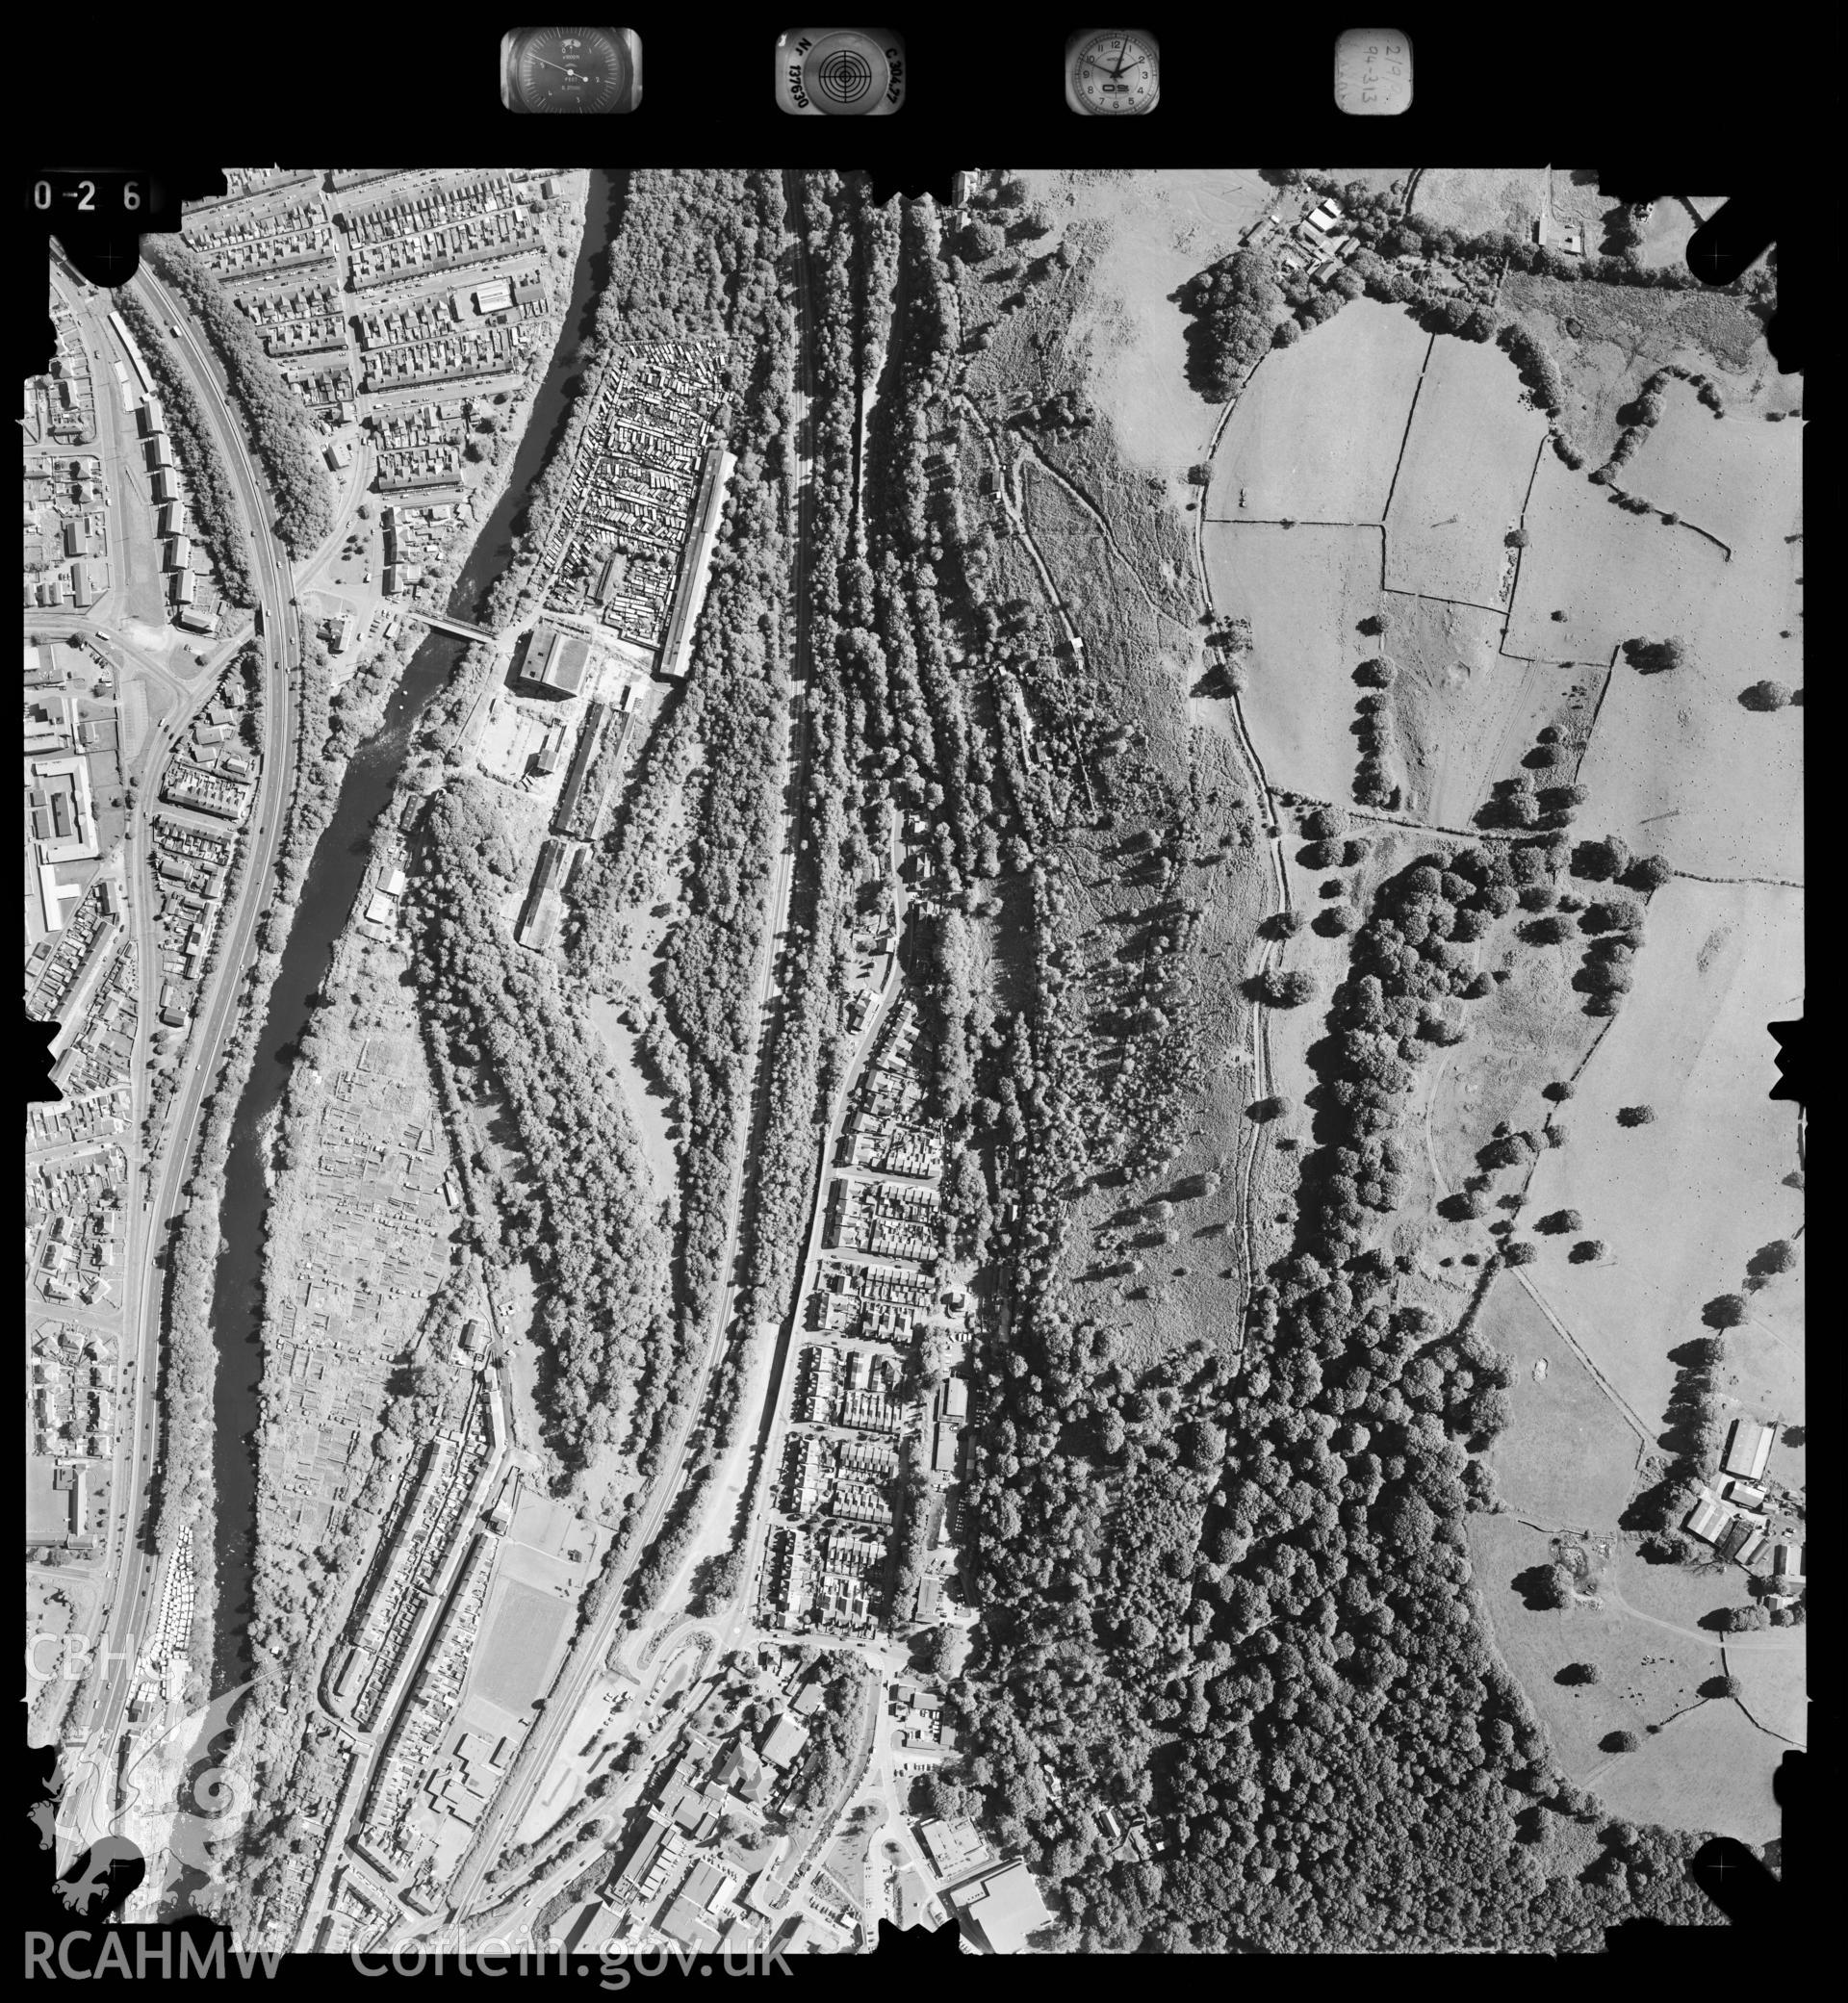 Digitized copy of an aerial photograph showing the Treforest area, taken by Ordnance Survey, 1994.